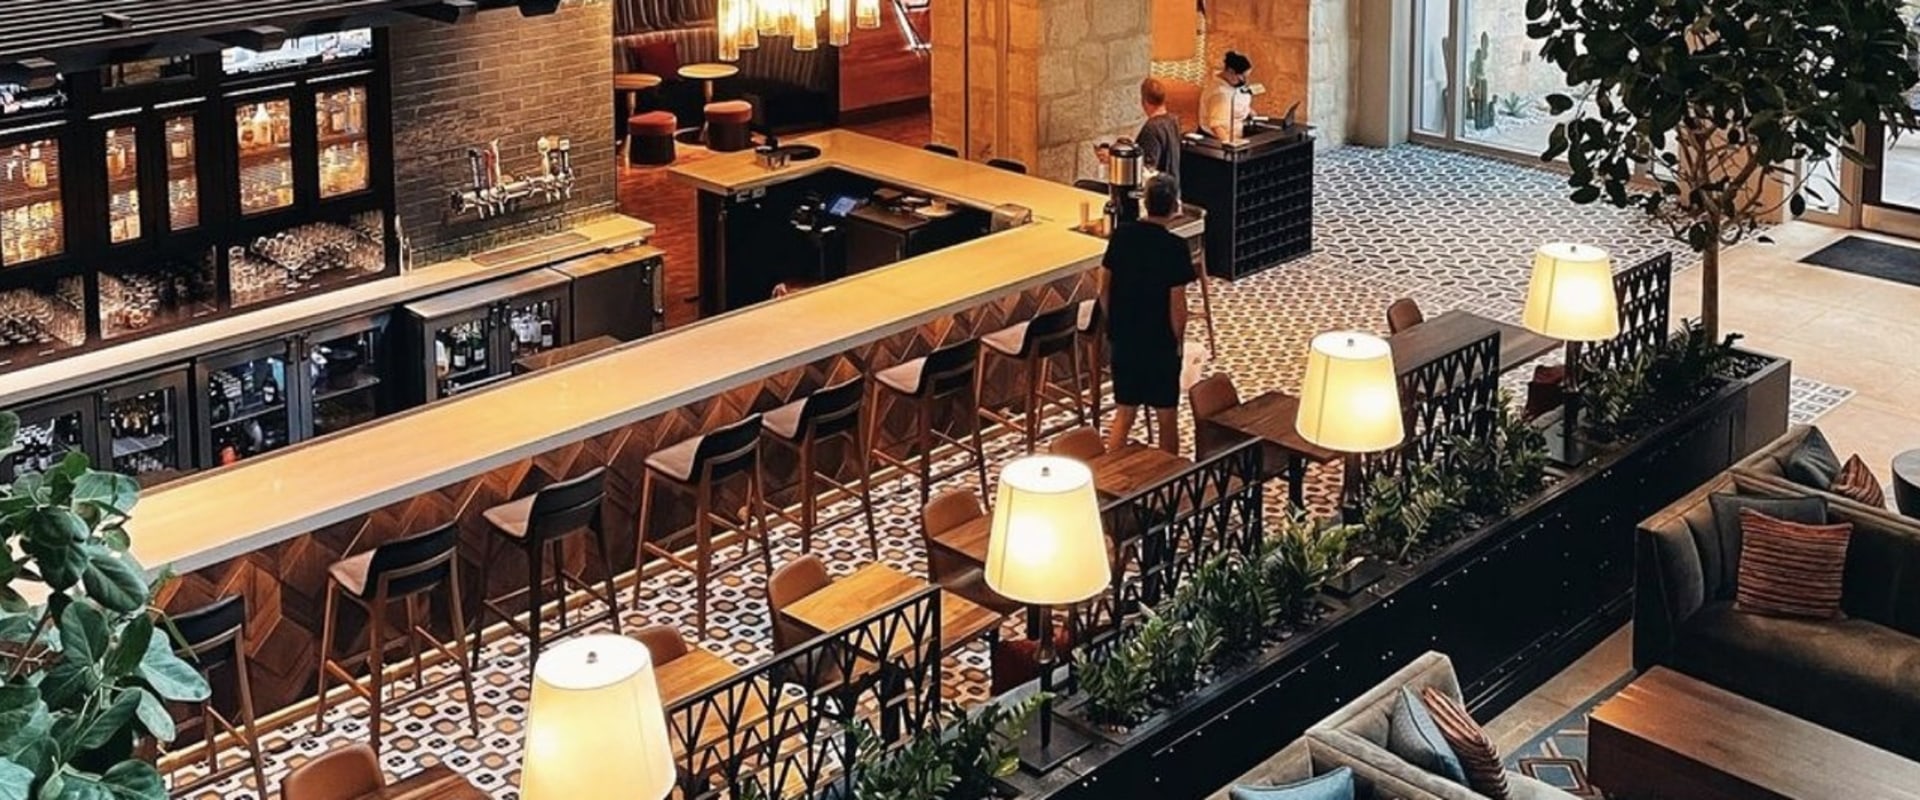 The Best Lounges for a Successful Business Meeting in San Antonio